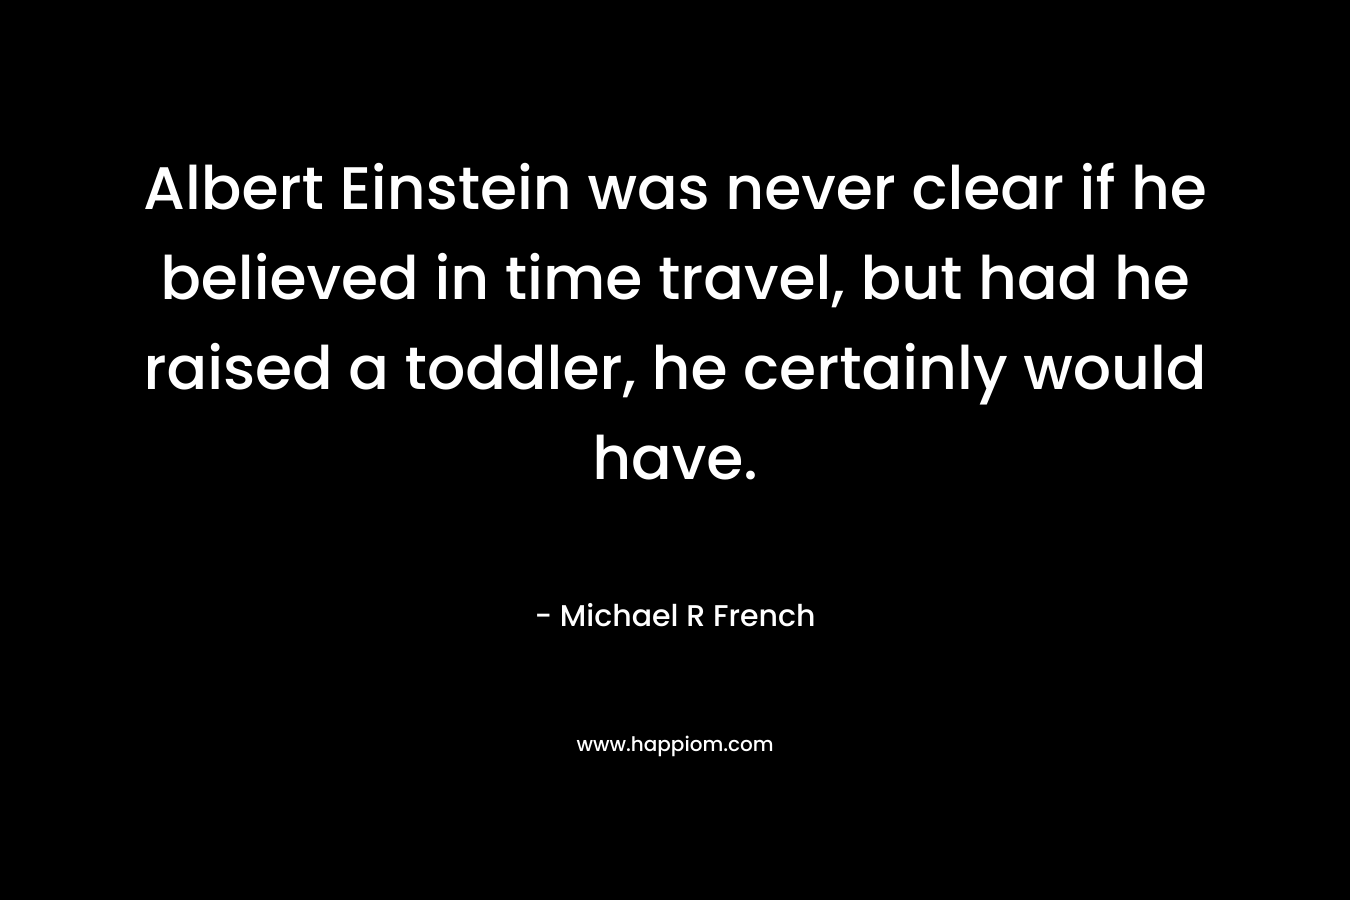 Albert Einstein was never clear if he believed in time travel, but had he raised a toddler, he certainly would have. – Michael R French